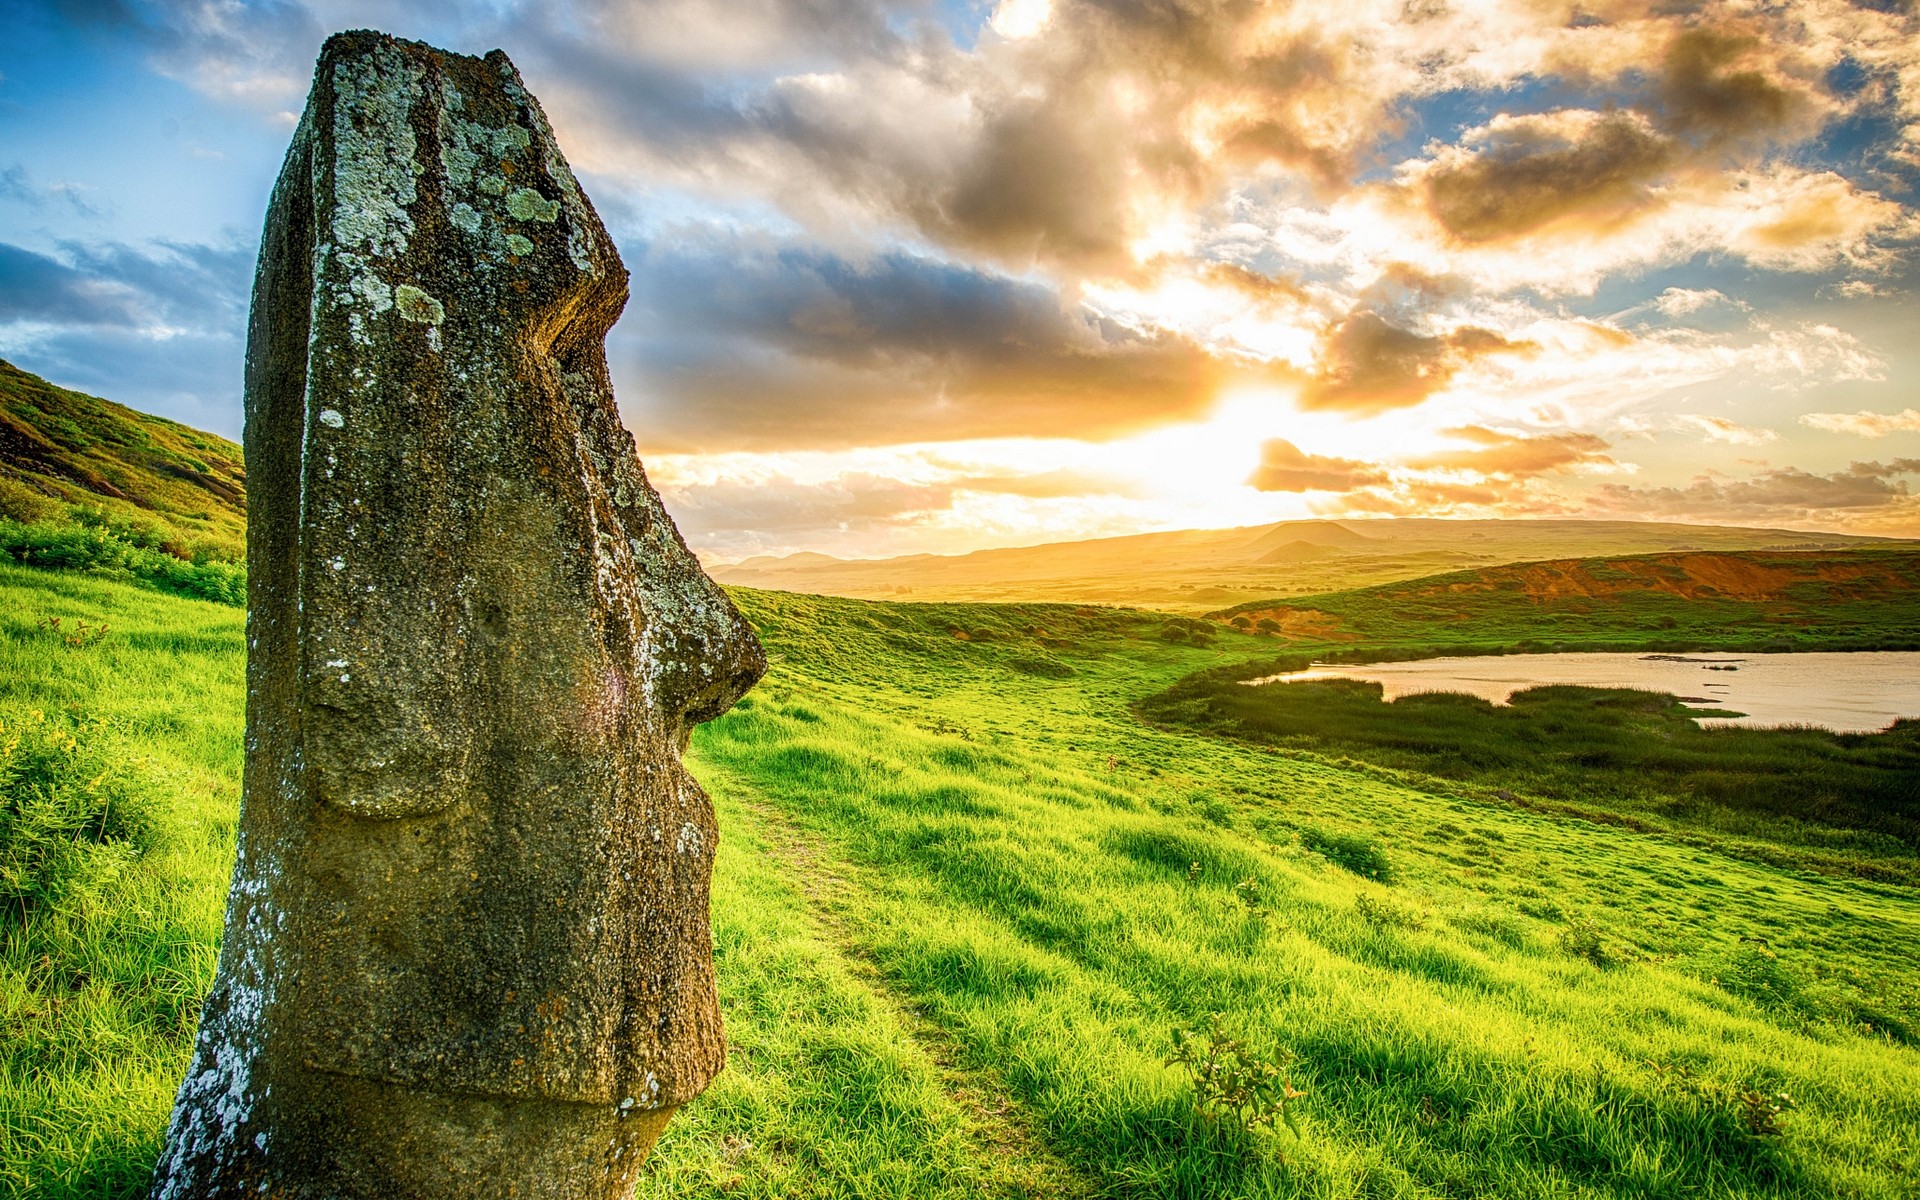 General 1920x1200 landscape nature Moai Rapa Nui Easter Island archeology statue sunset beach clouds sea Chile grass enigma hills World Heritage Site colorful